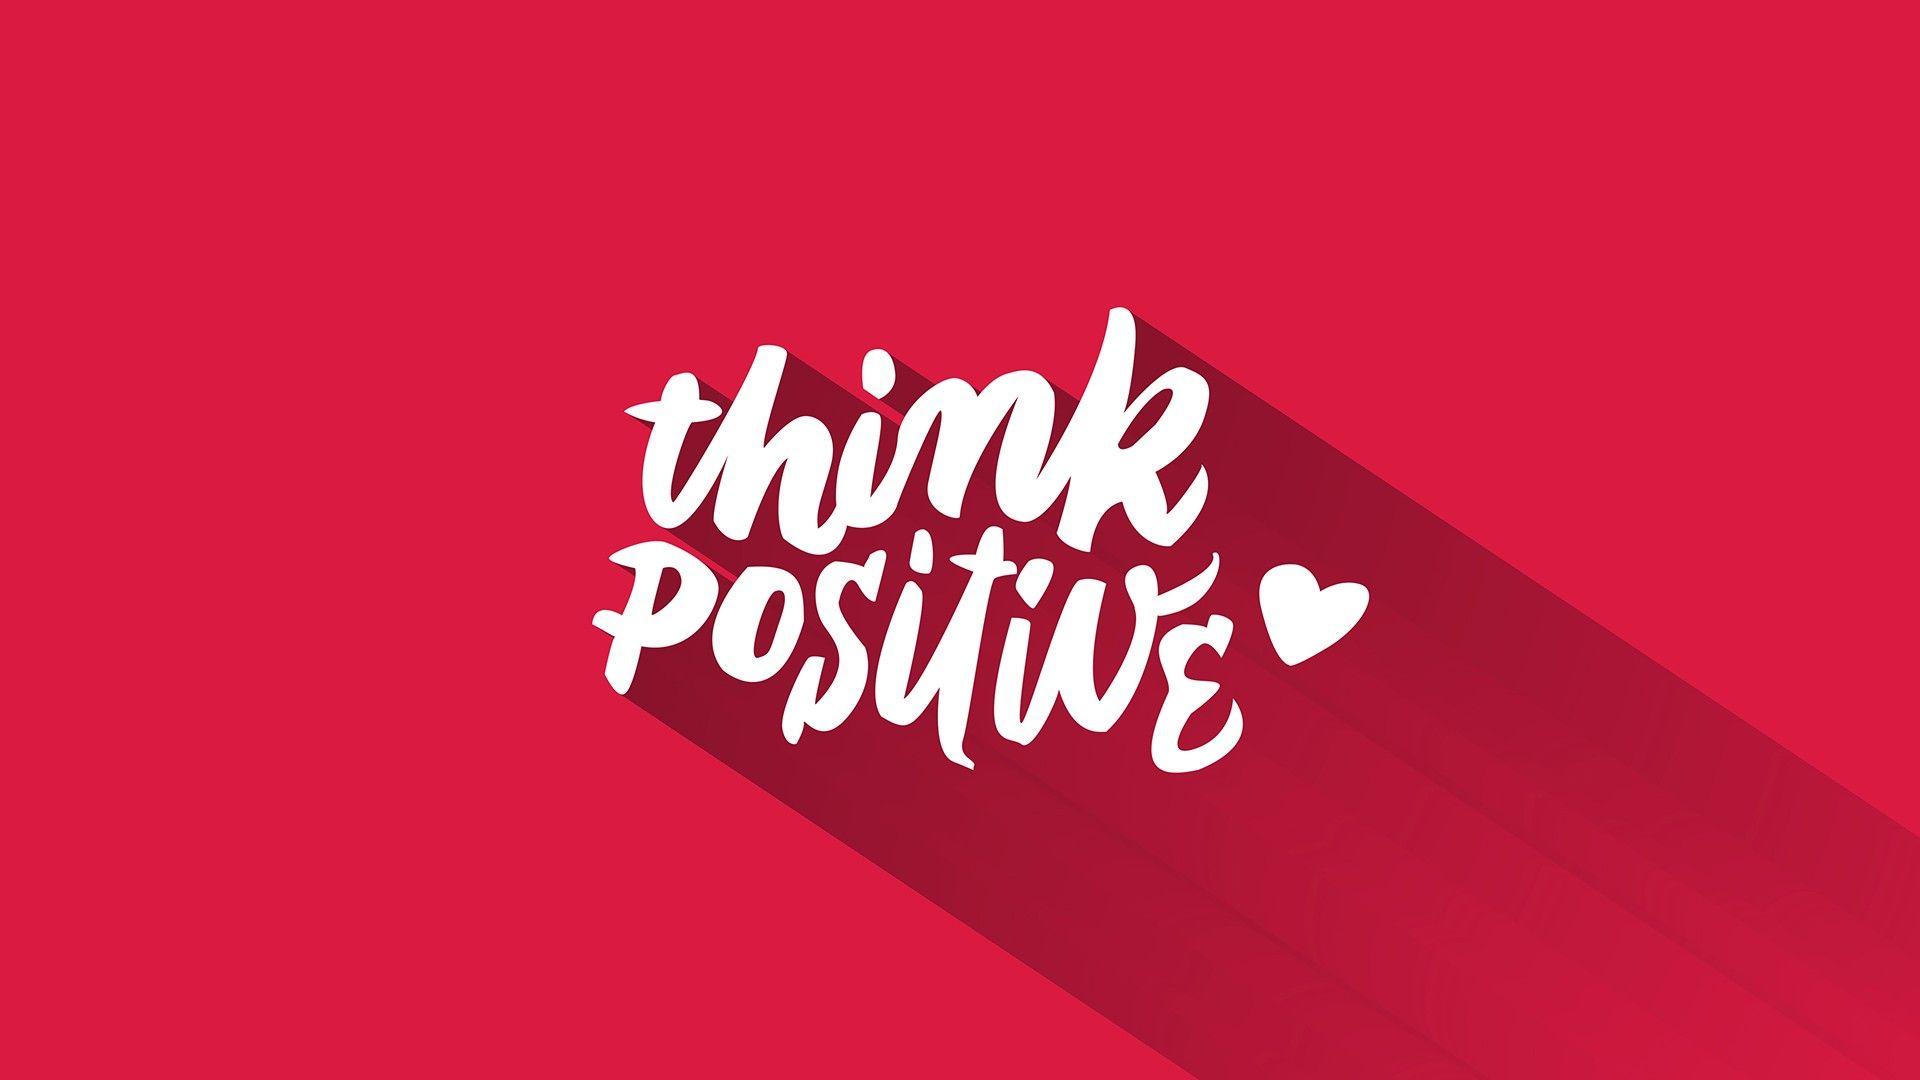 Wallpaper Stay Positive Images  Free Photos PNG Stickers Wallpapers   Backgrounds  rawpixel